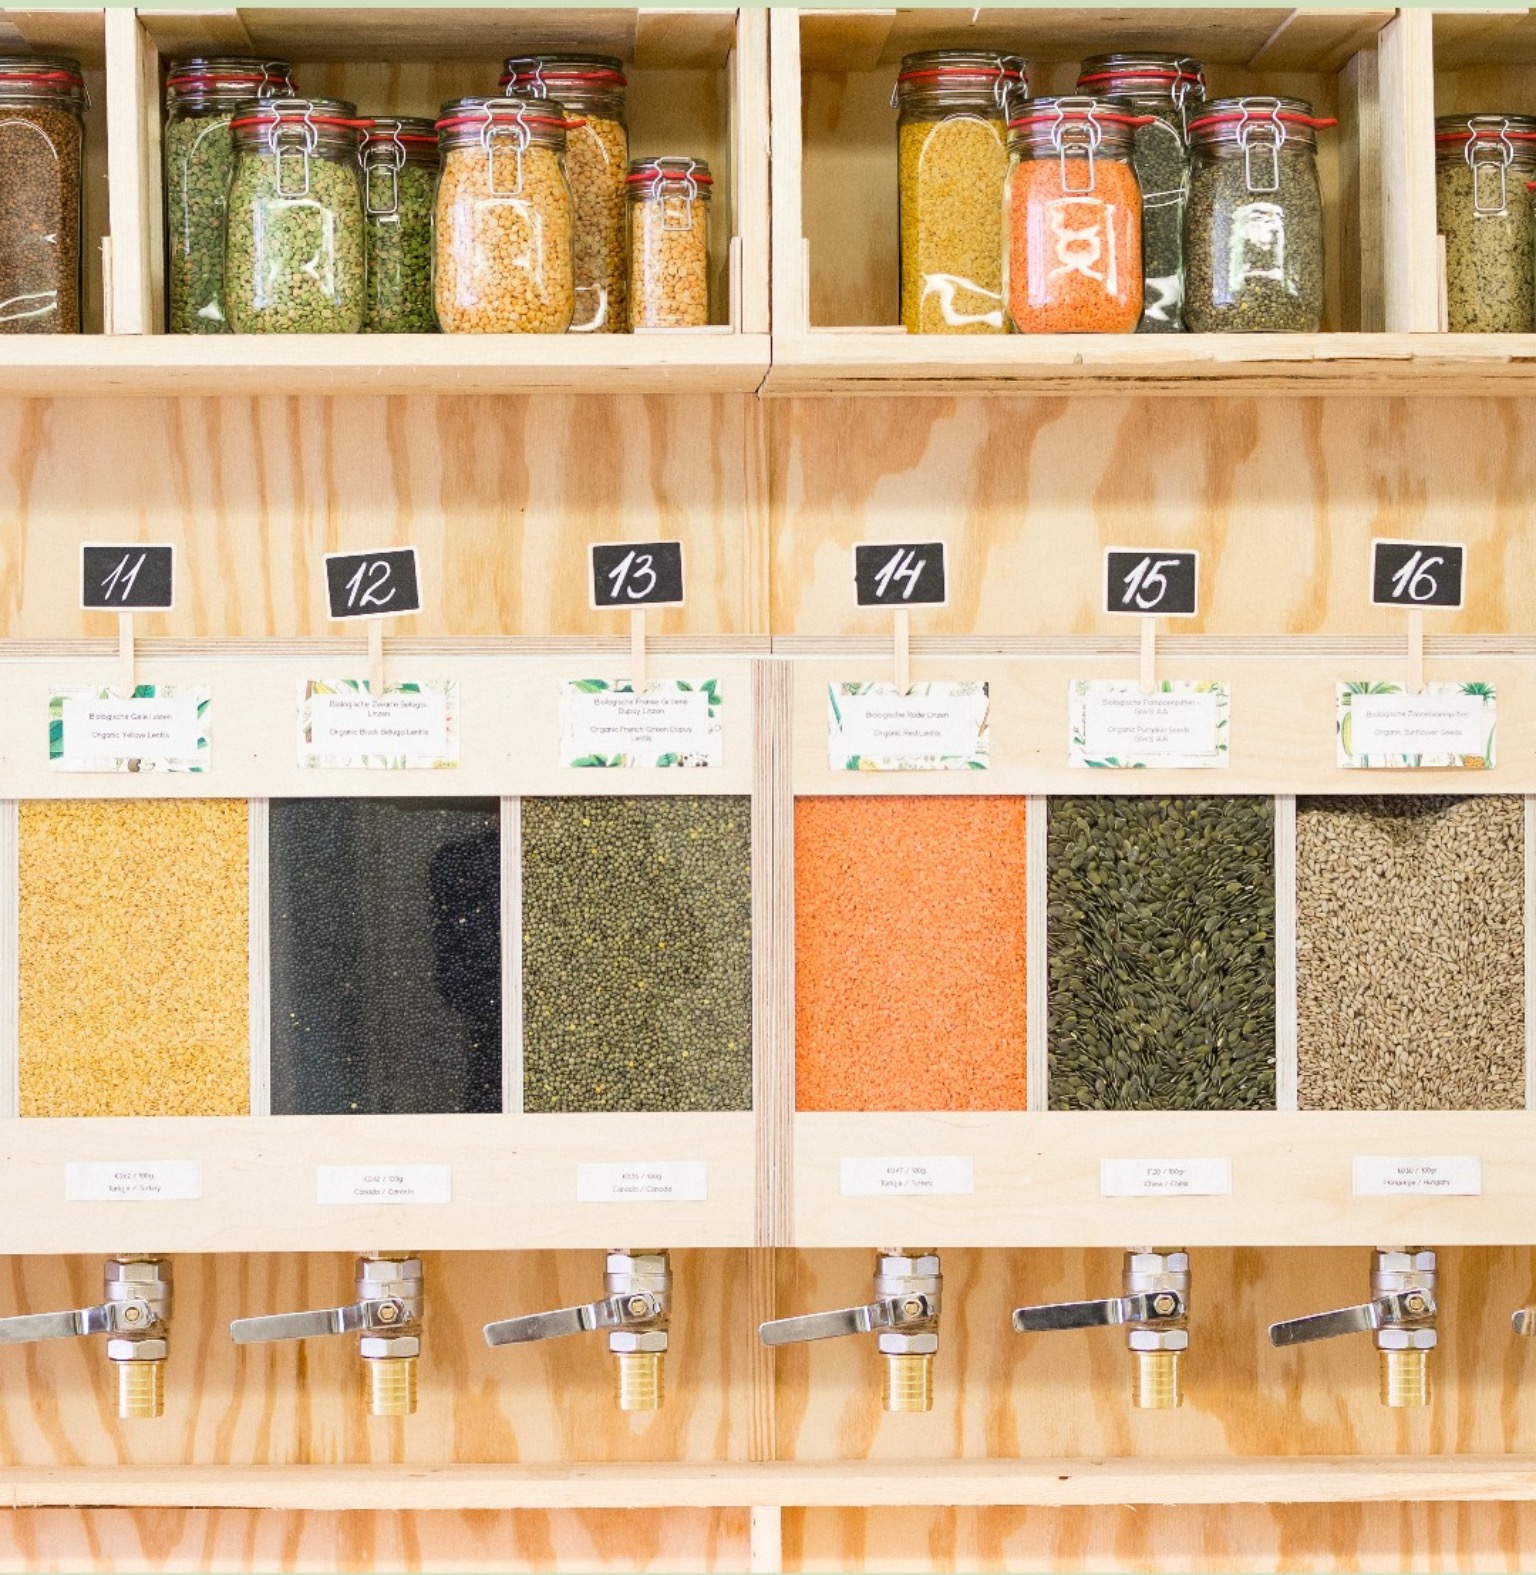 A plant-based, zero-waste, bulk whole-foods store with a focus on ethical consumerism and sustainability: who wouldn’t want a Little Plant Pantry in their neighbourhood?